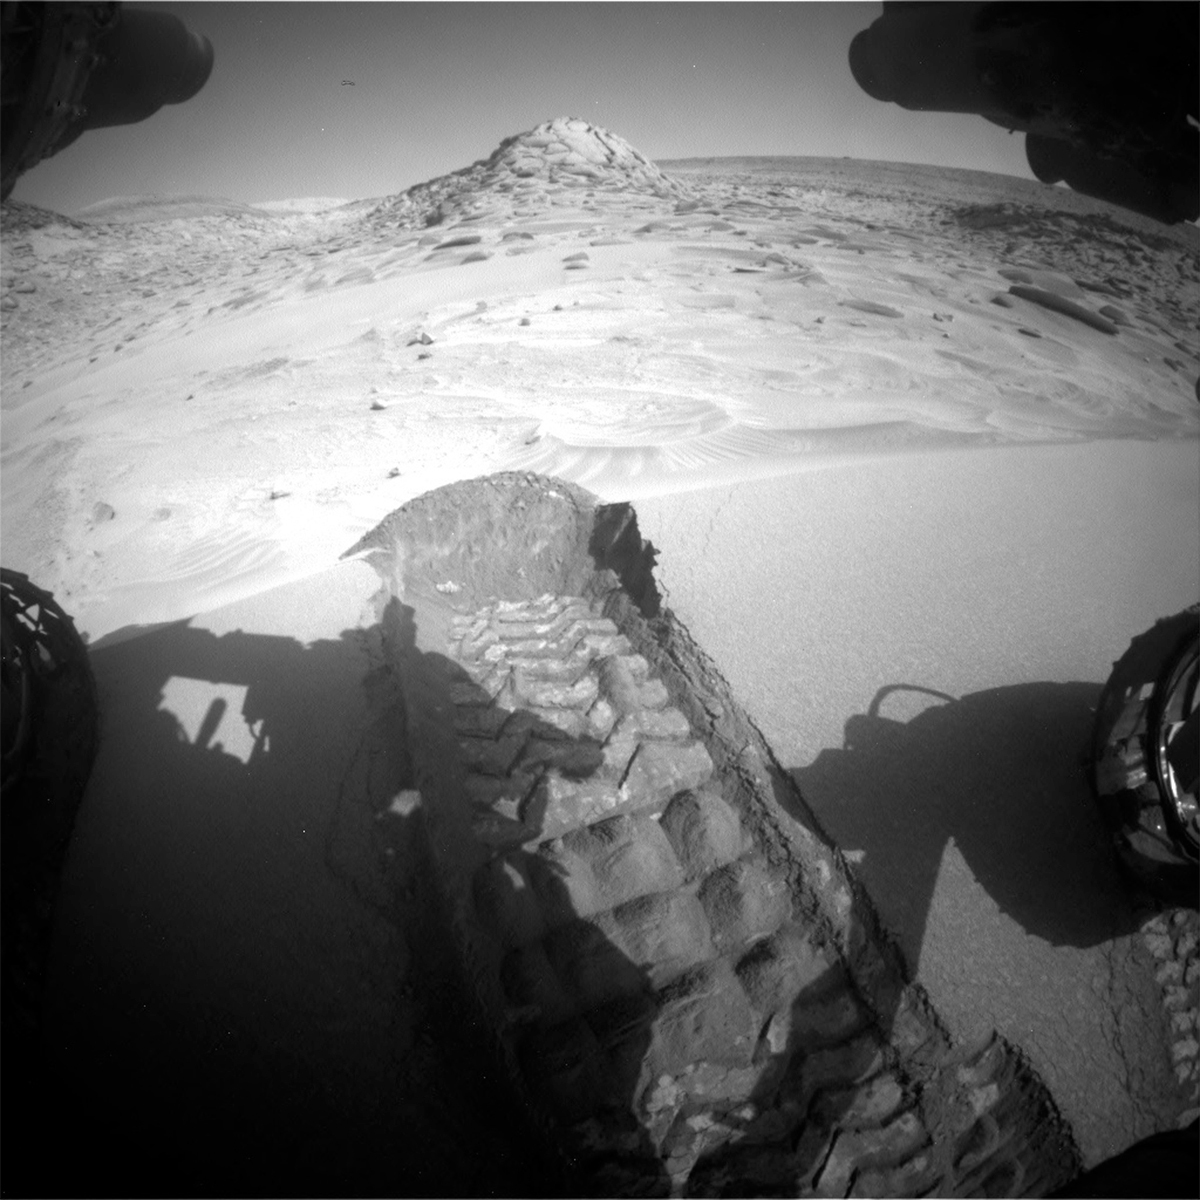 This image shows Curiosity's wheel scuff, nicknamed "Taracua," on the Mars surface and part of the rover's wheels.